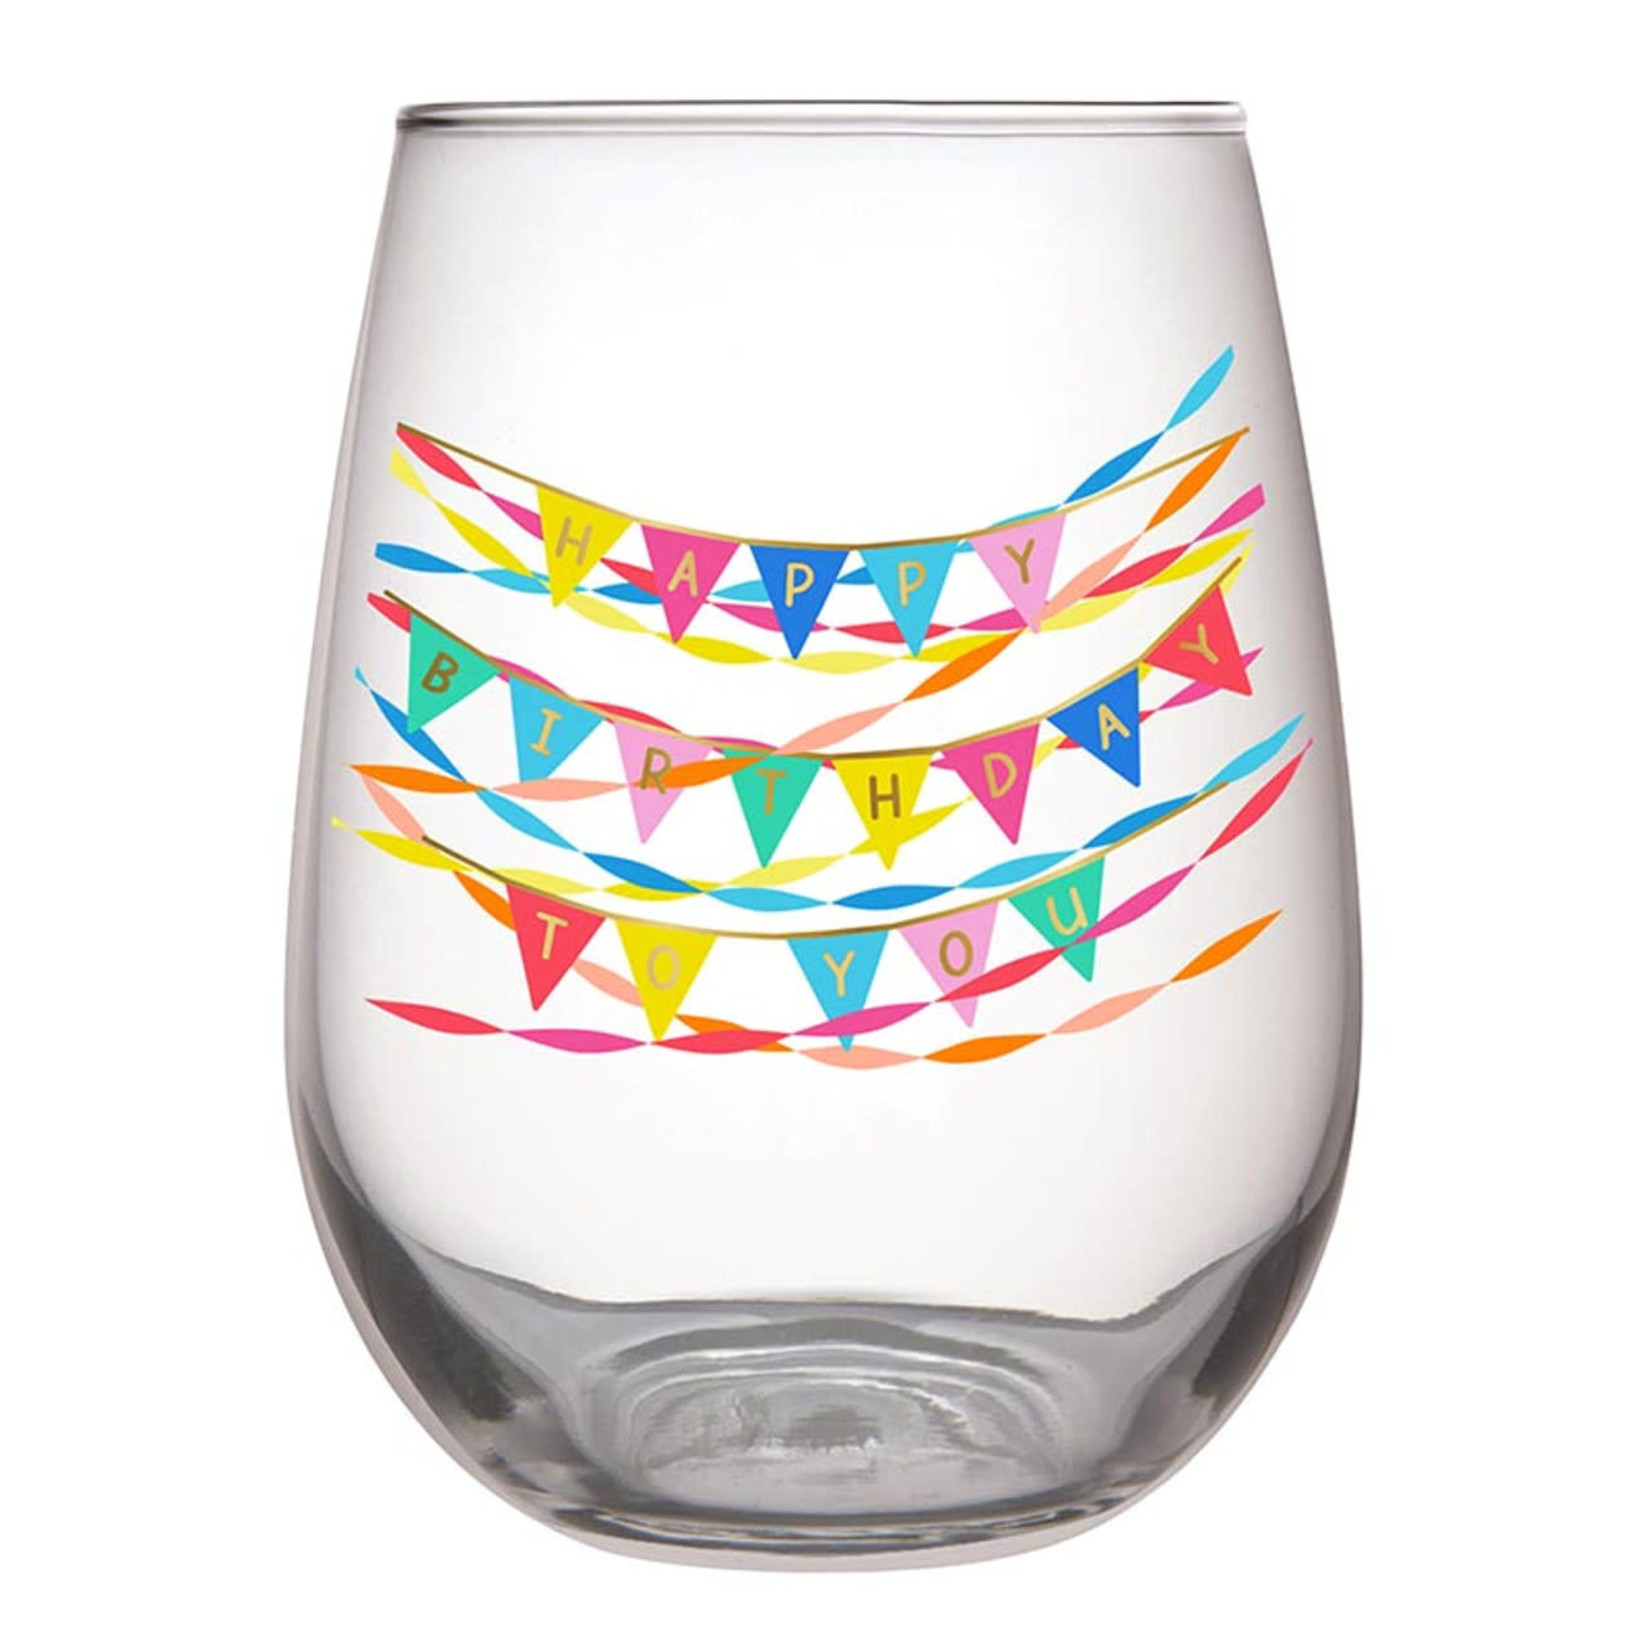 Slant Collections Stemless Wine Glass - Happy  Birthday to You